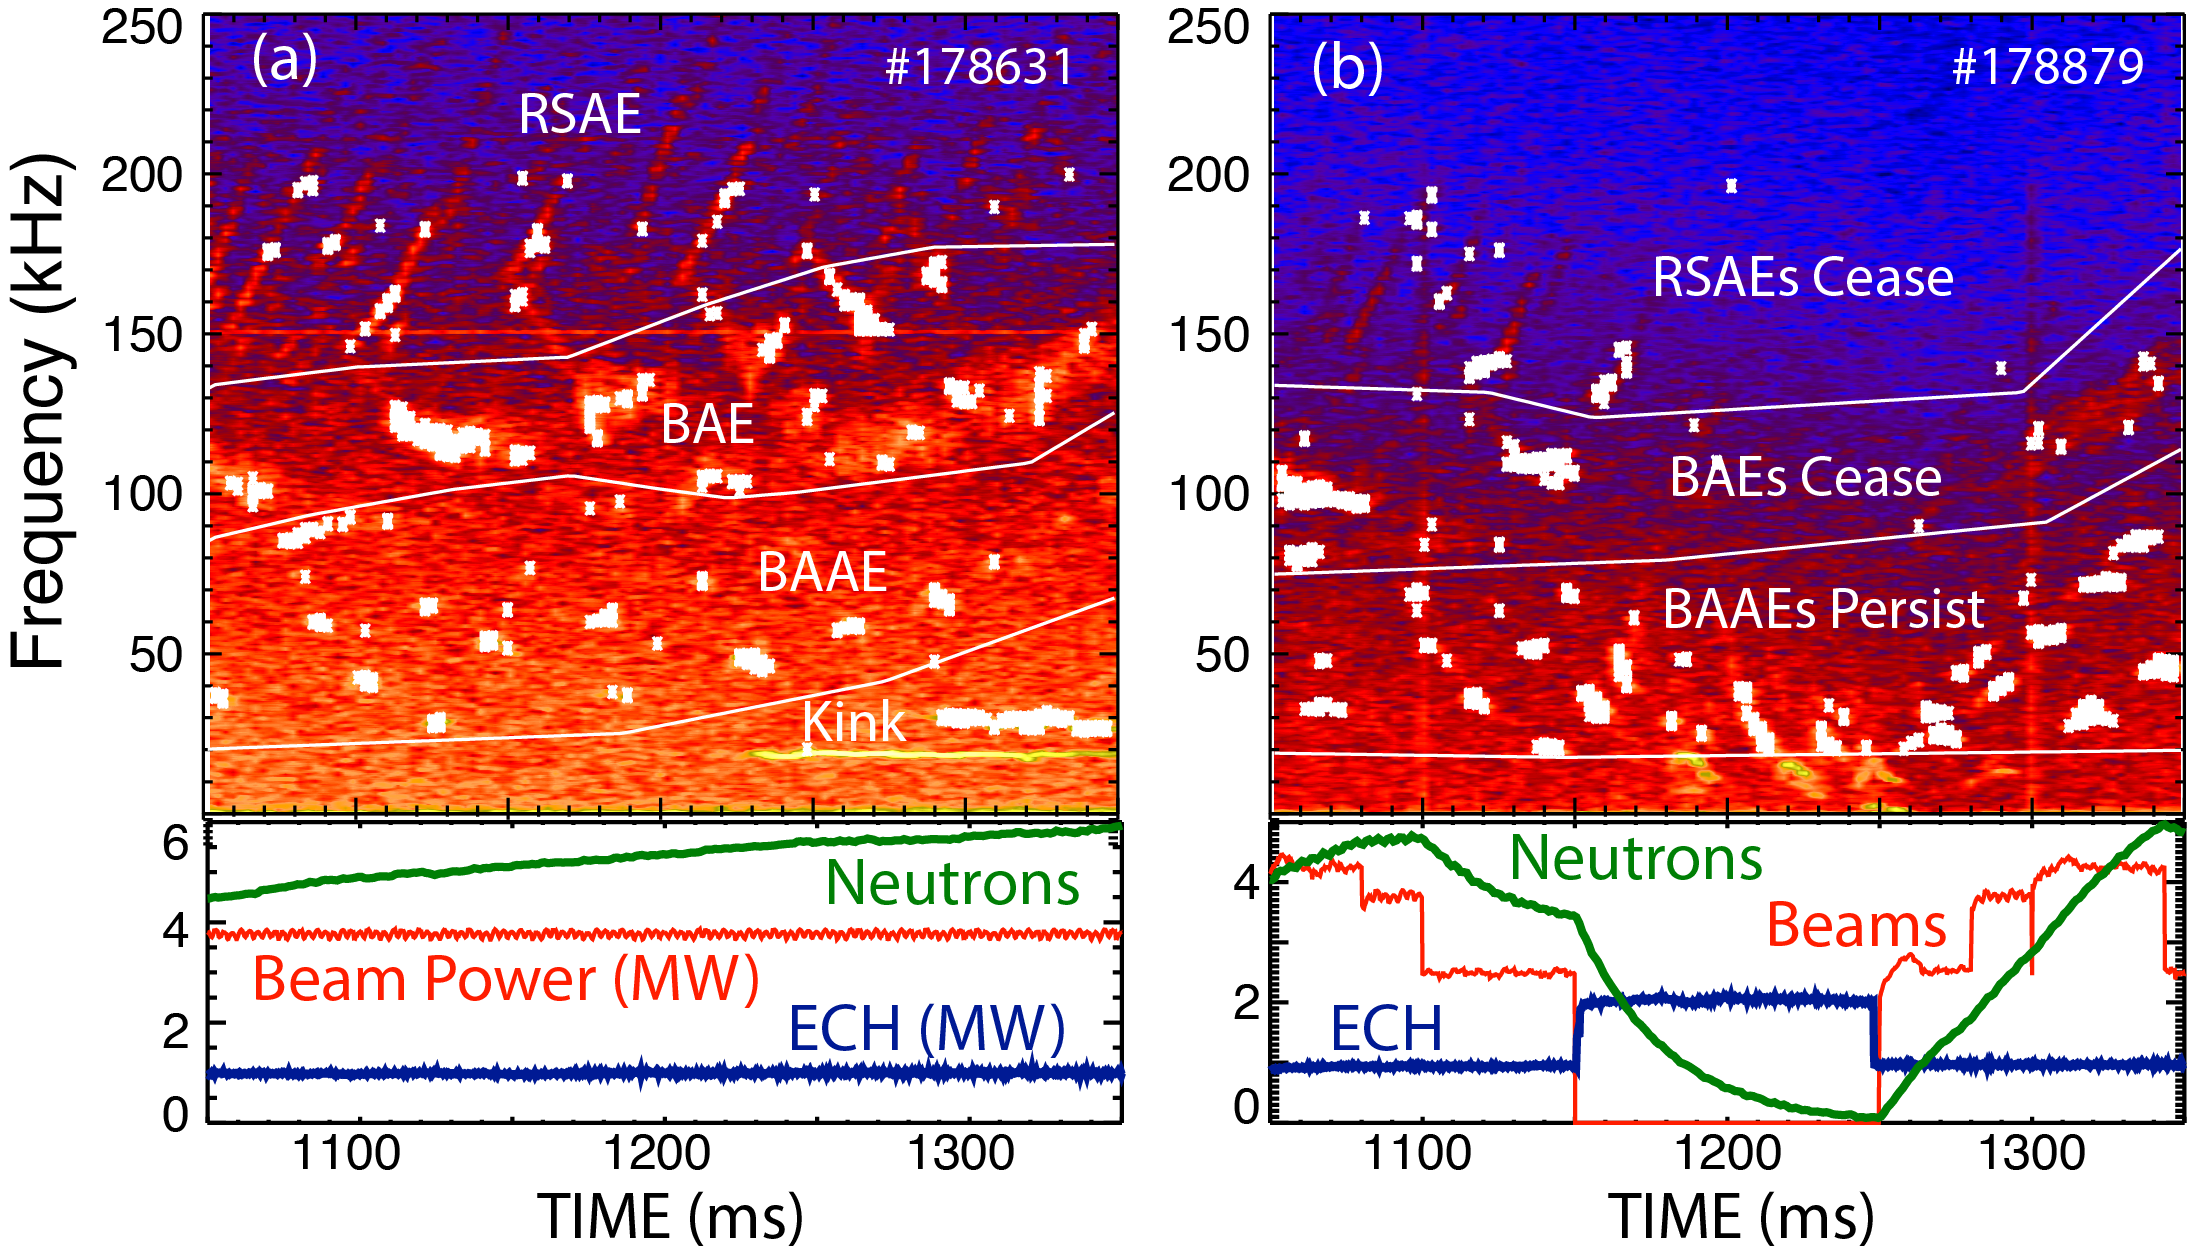 (a) Reference shot with persistent RSAE, BAE, and BAAE activity during steady NBI and ECH heating. (b) When NBI is turned off, RSAE and BAE activity ceases  and the neutron rate approaches zero but BAAE activity persists. (The BAAE frequency drops because the toroidal rotation slows.) Units for the neutron signal: $10^{14}$/s.